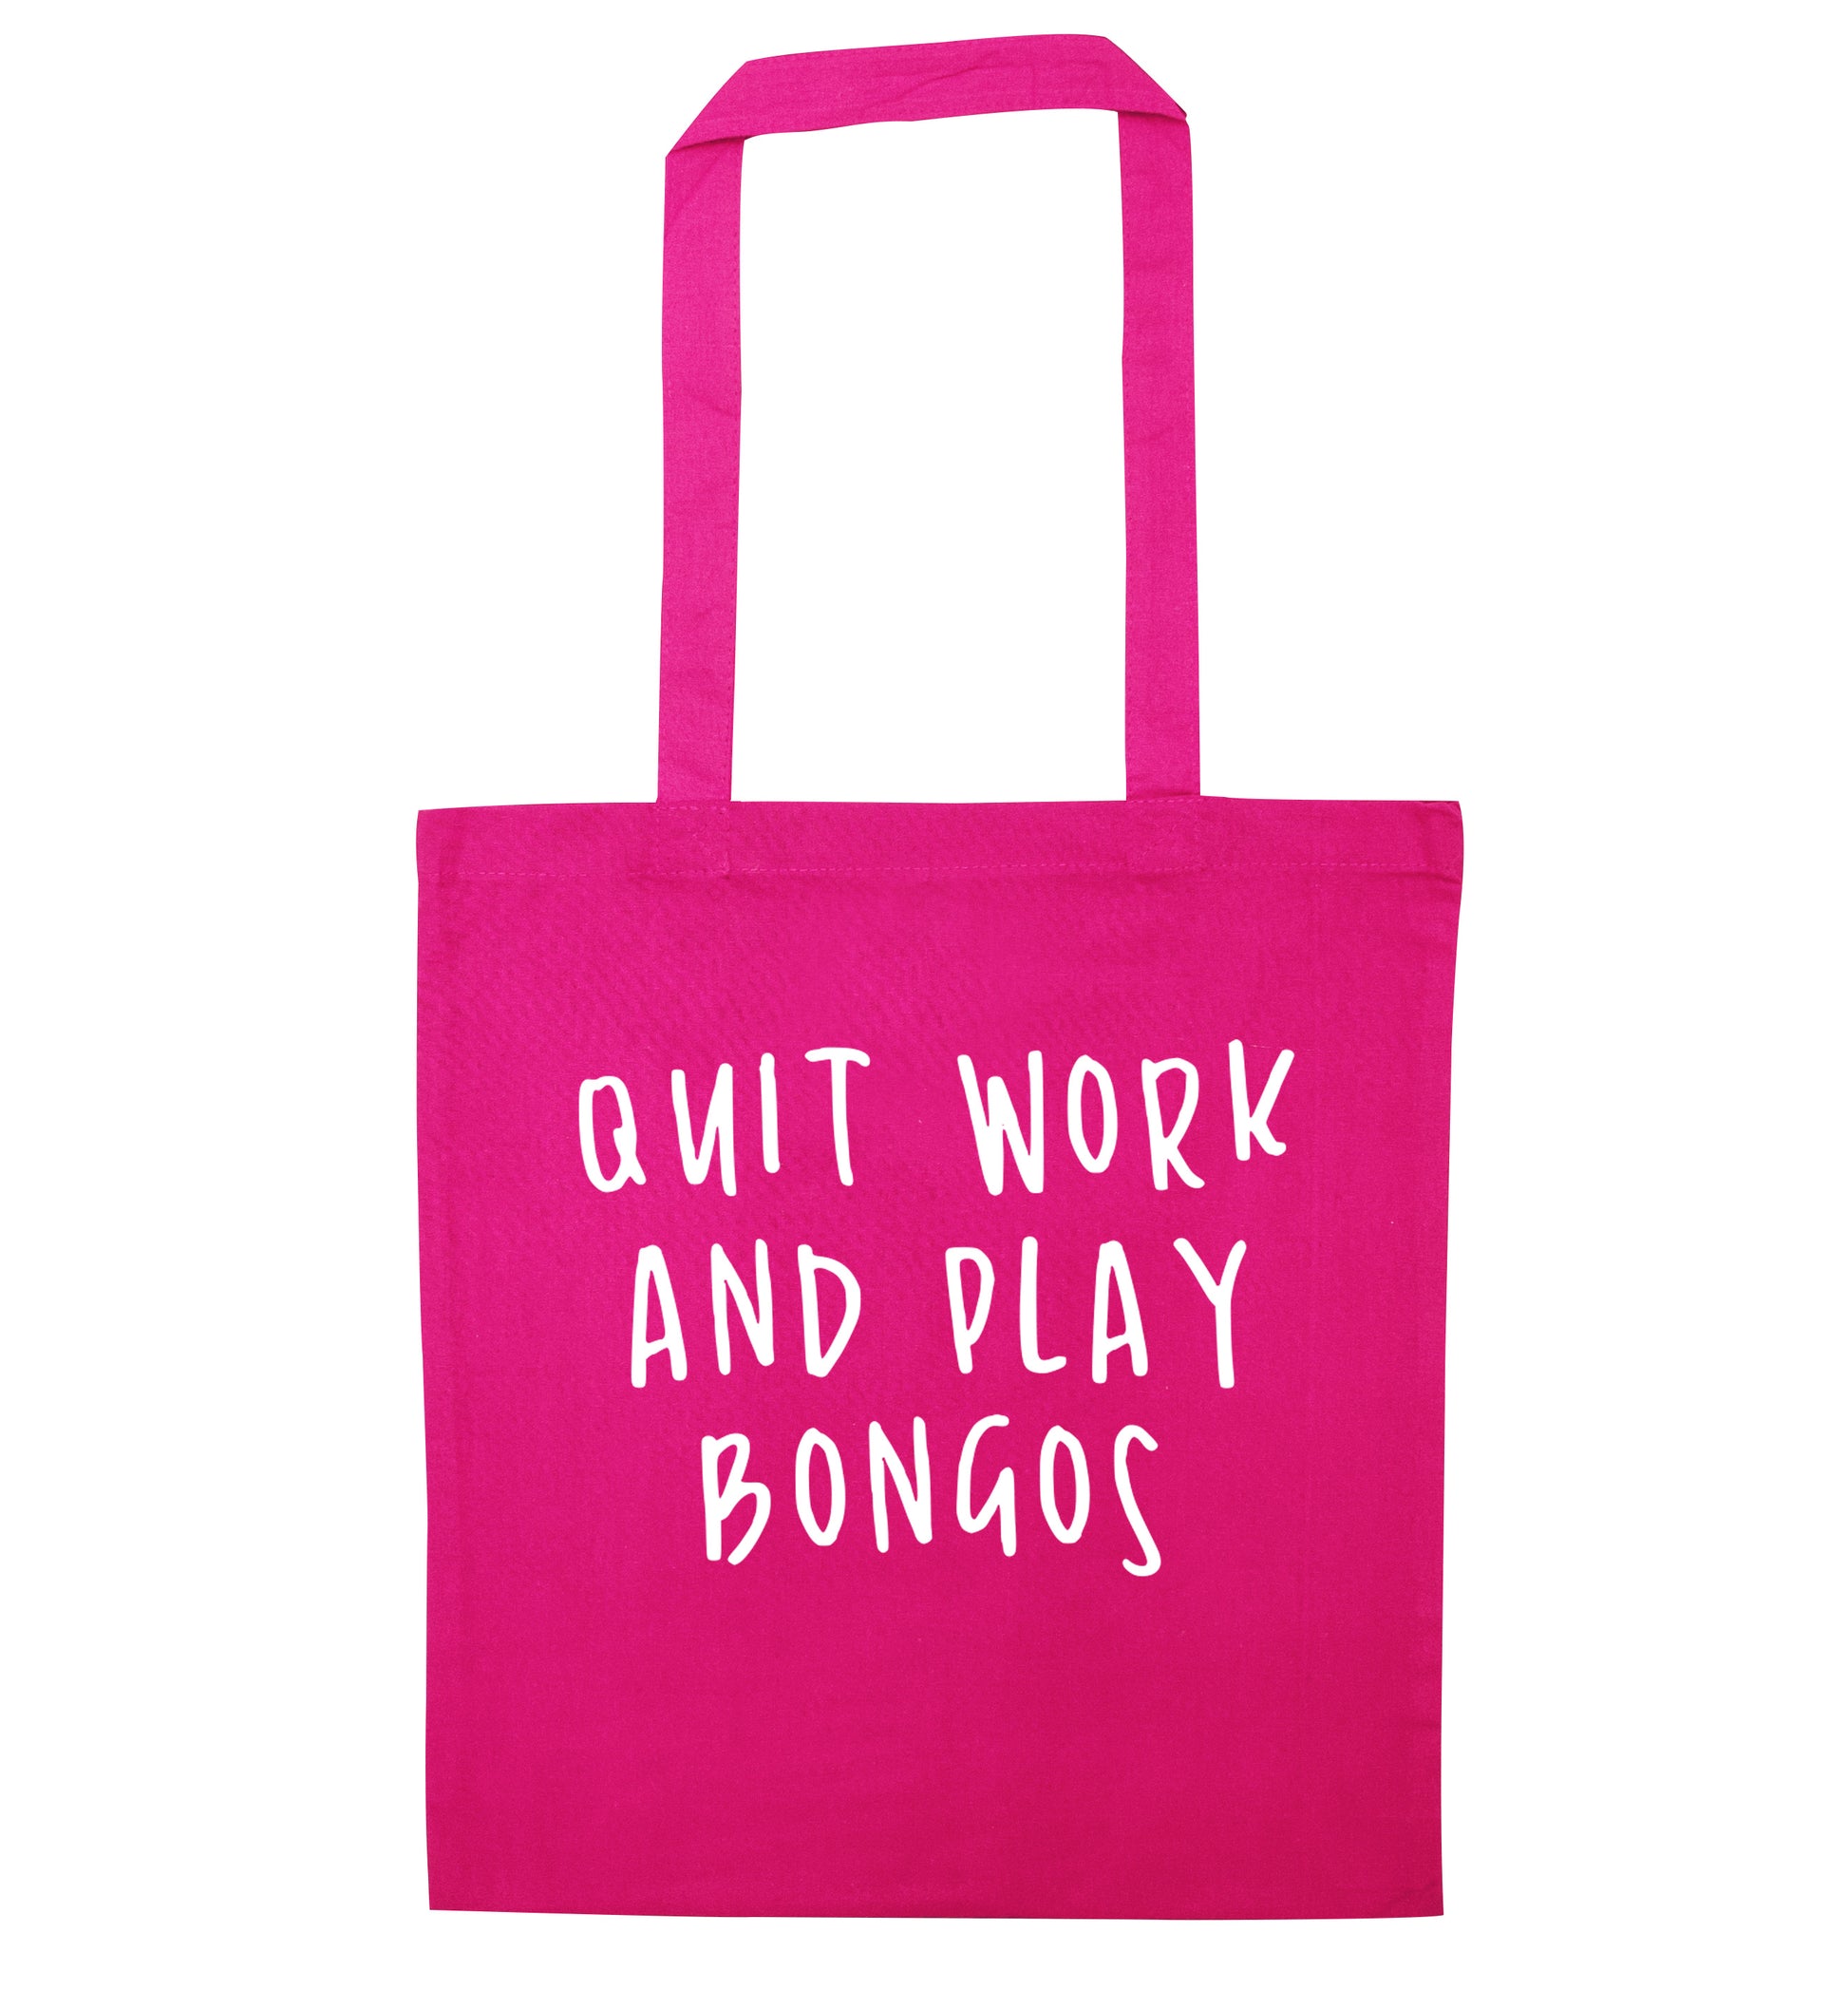 Quit work and play bongos pink tote bag